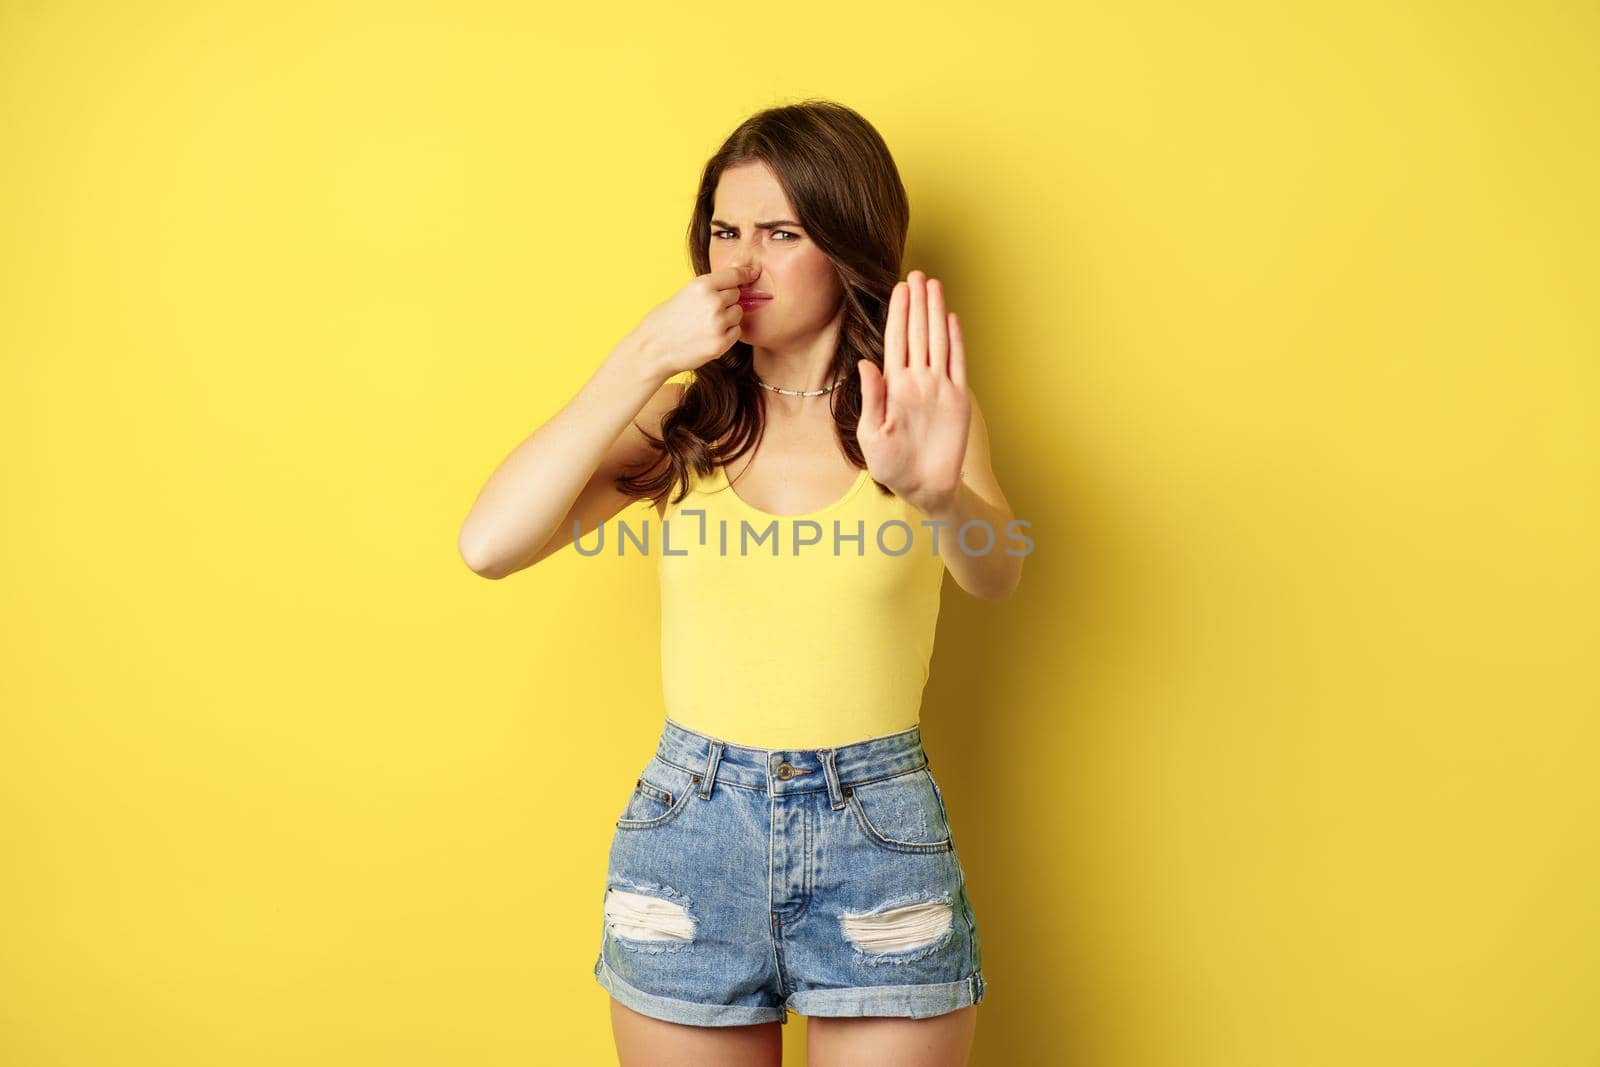 Woman showing stop sign and shut nose from disgust, dislike bad smell, declining something awful, standing over yellow background.